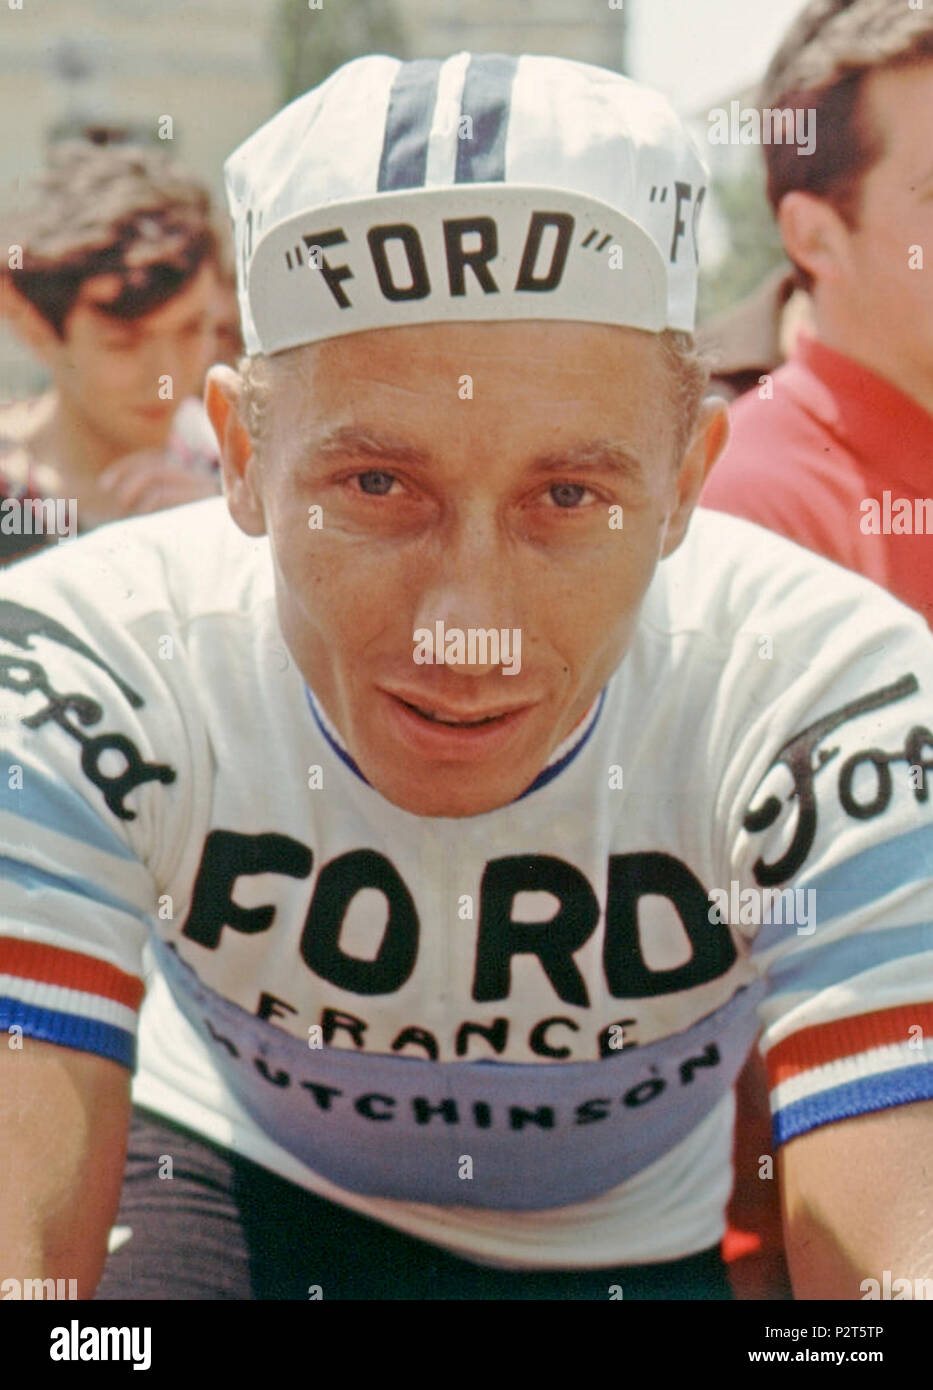 . The French cyclist Jacques Anquetil posing at the start of a stage of the Giro d'Italia. Italy, May 1966 . May 1966. Giorgio Lotti 43 Jacques Anquetil 1966 Stock Photo